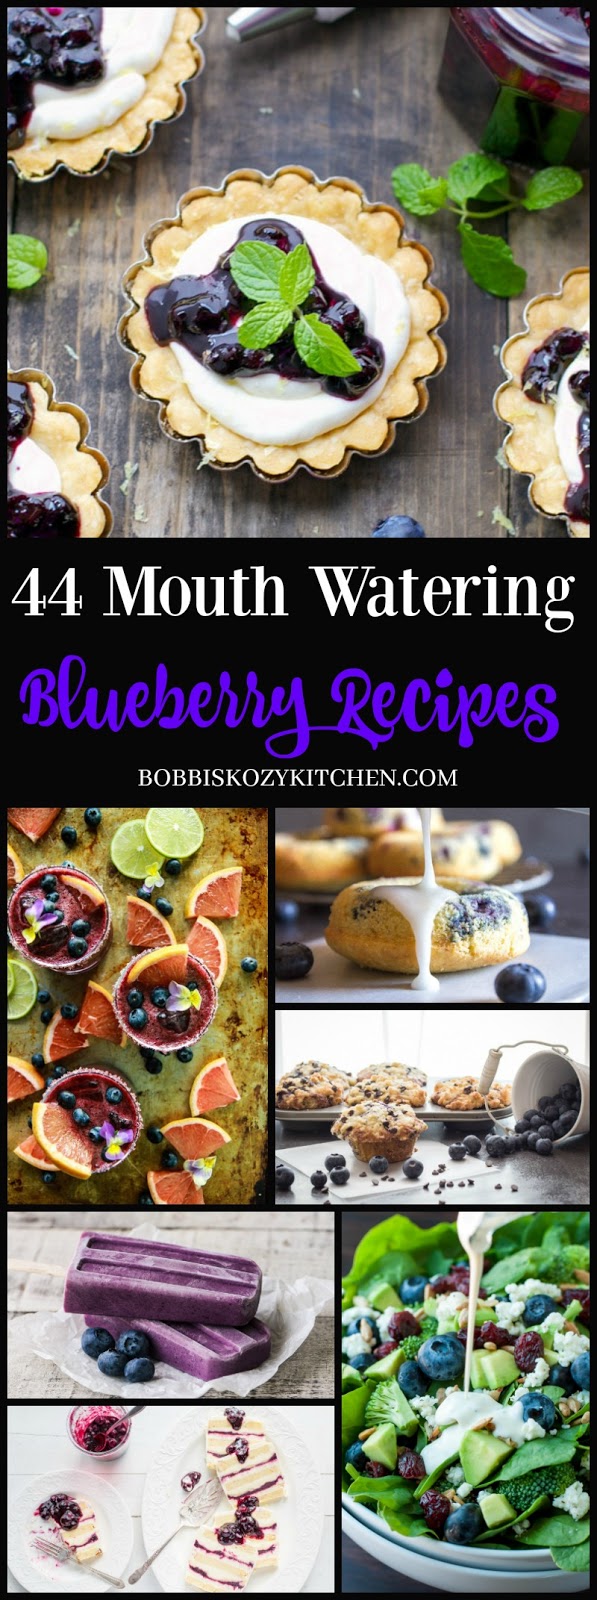 44 Mouth Watering Blueberry Recipes